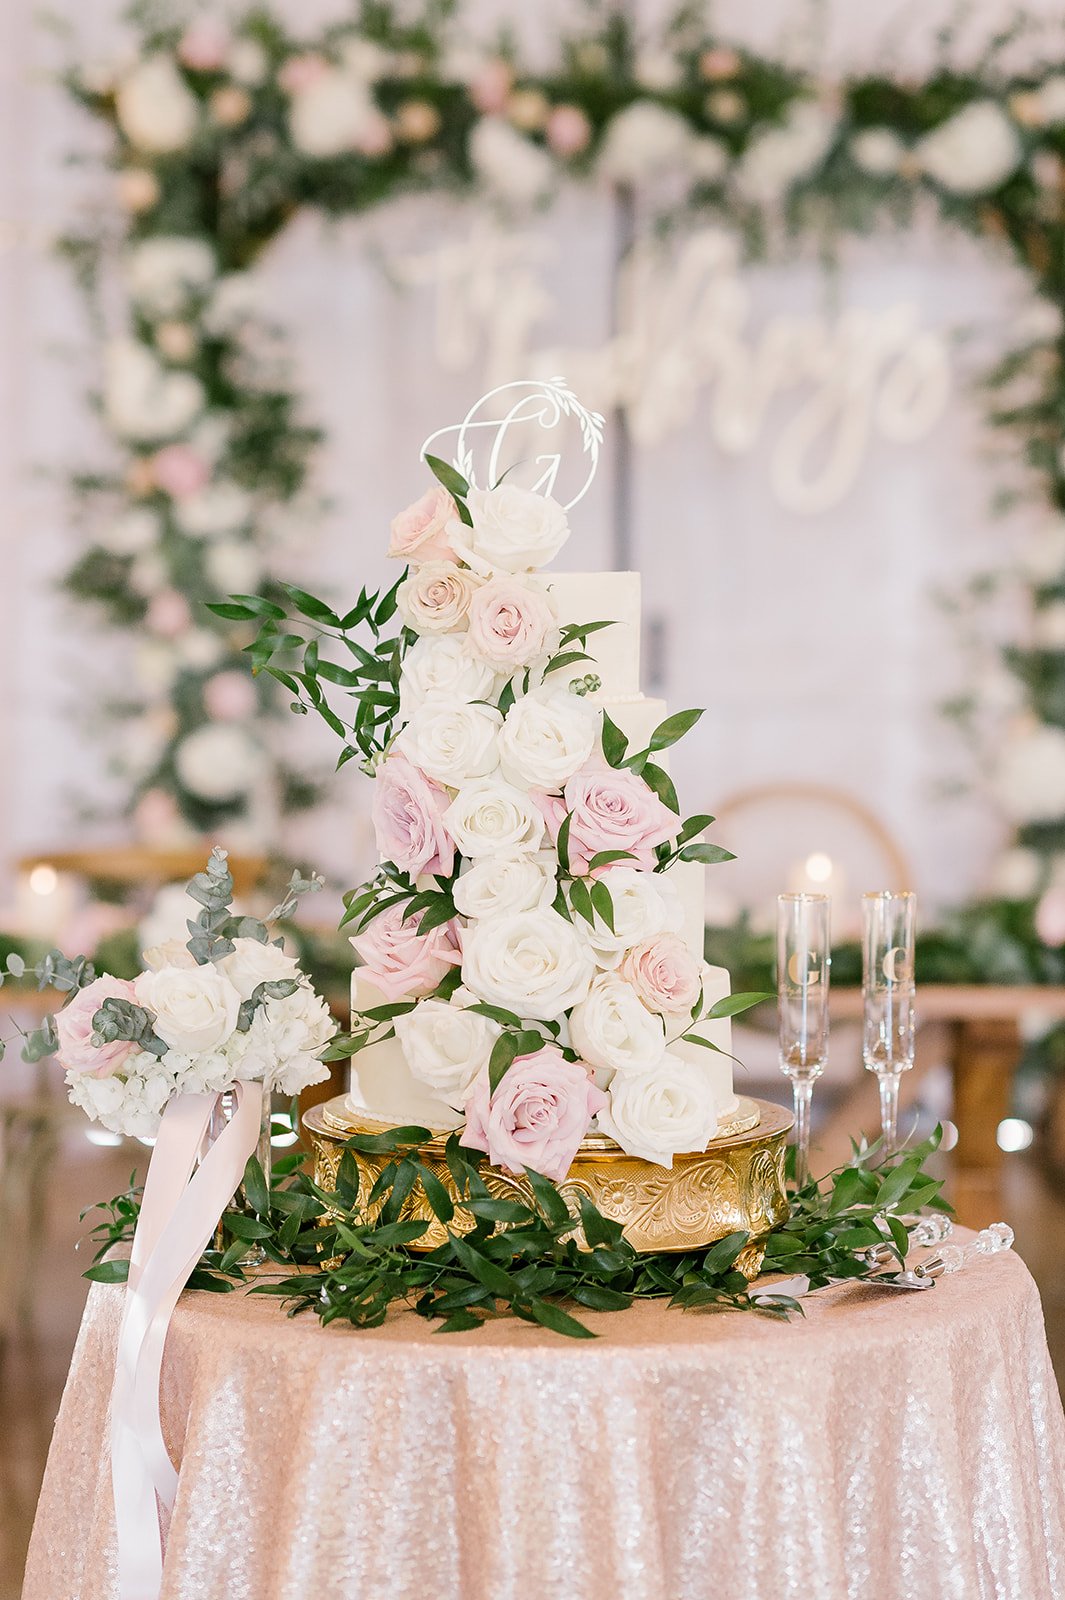 Blush and white cake florals with floral install frame